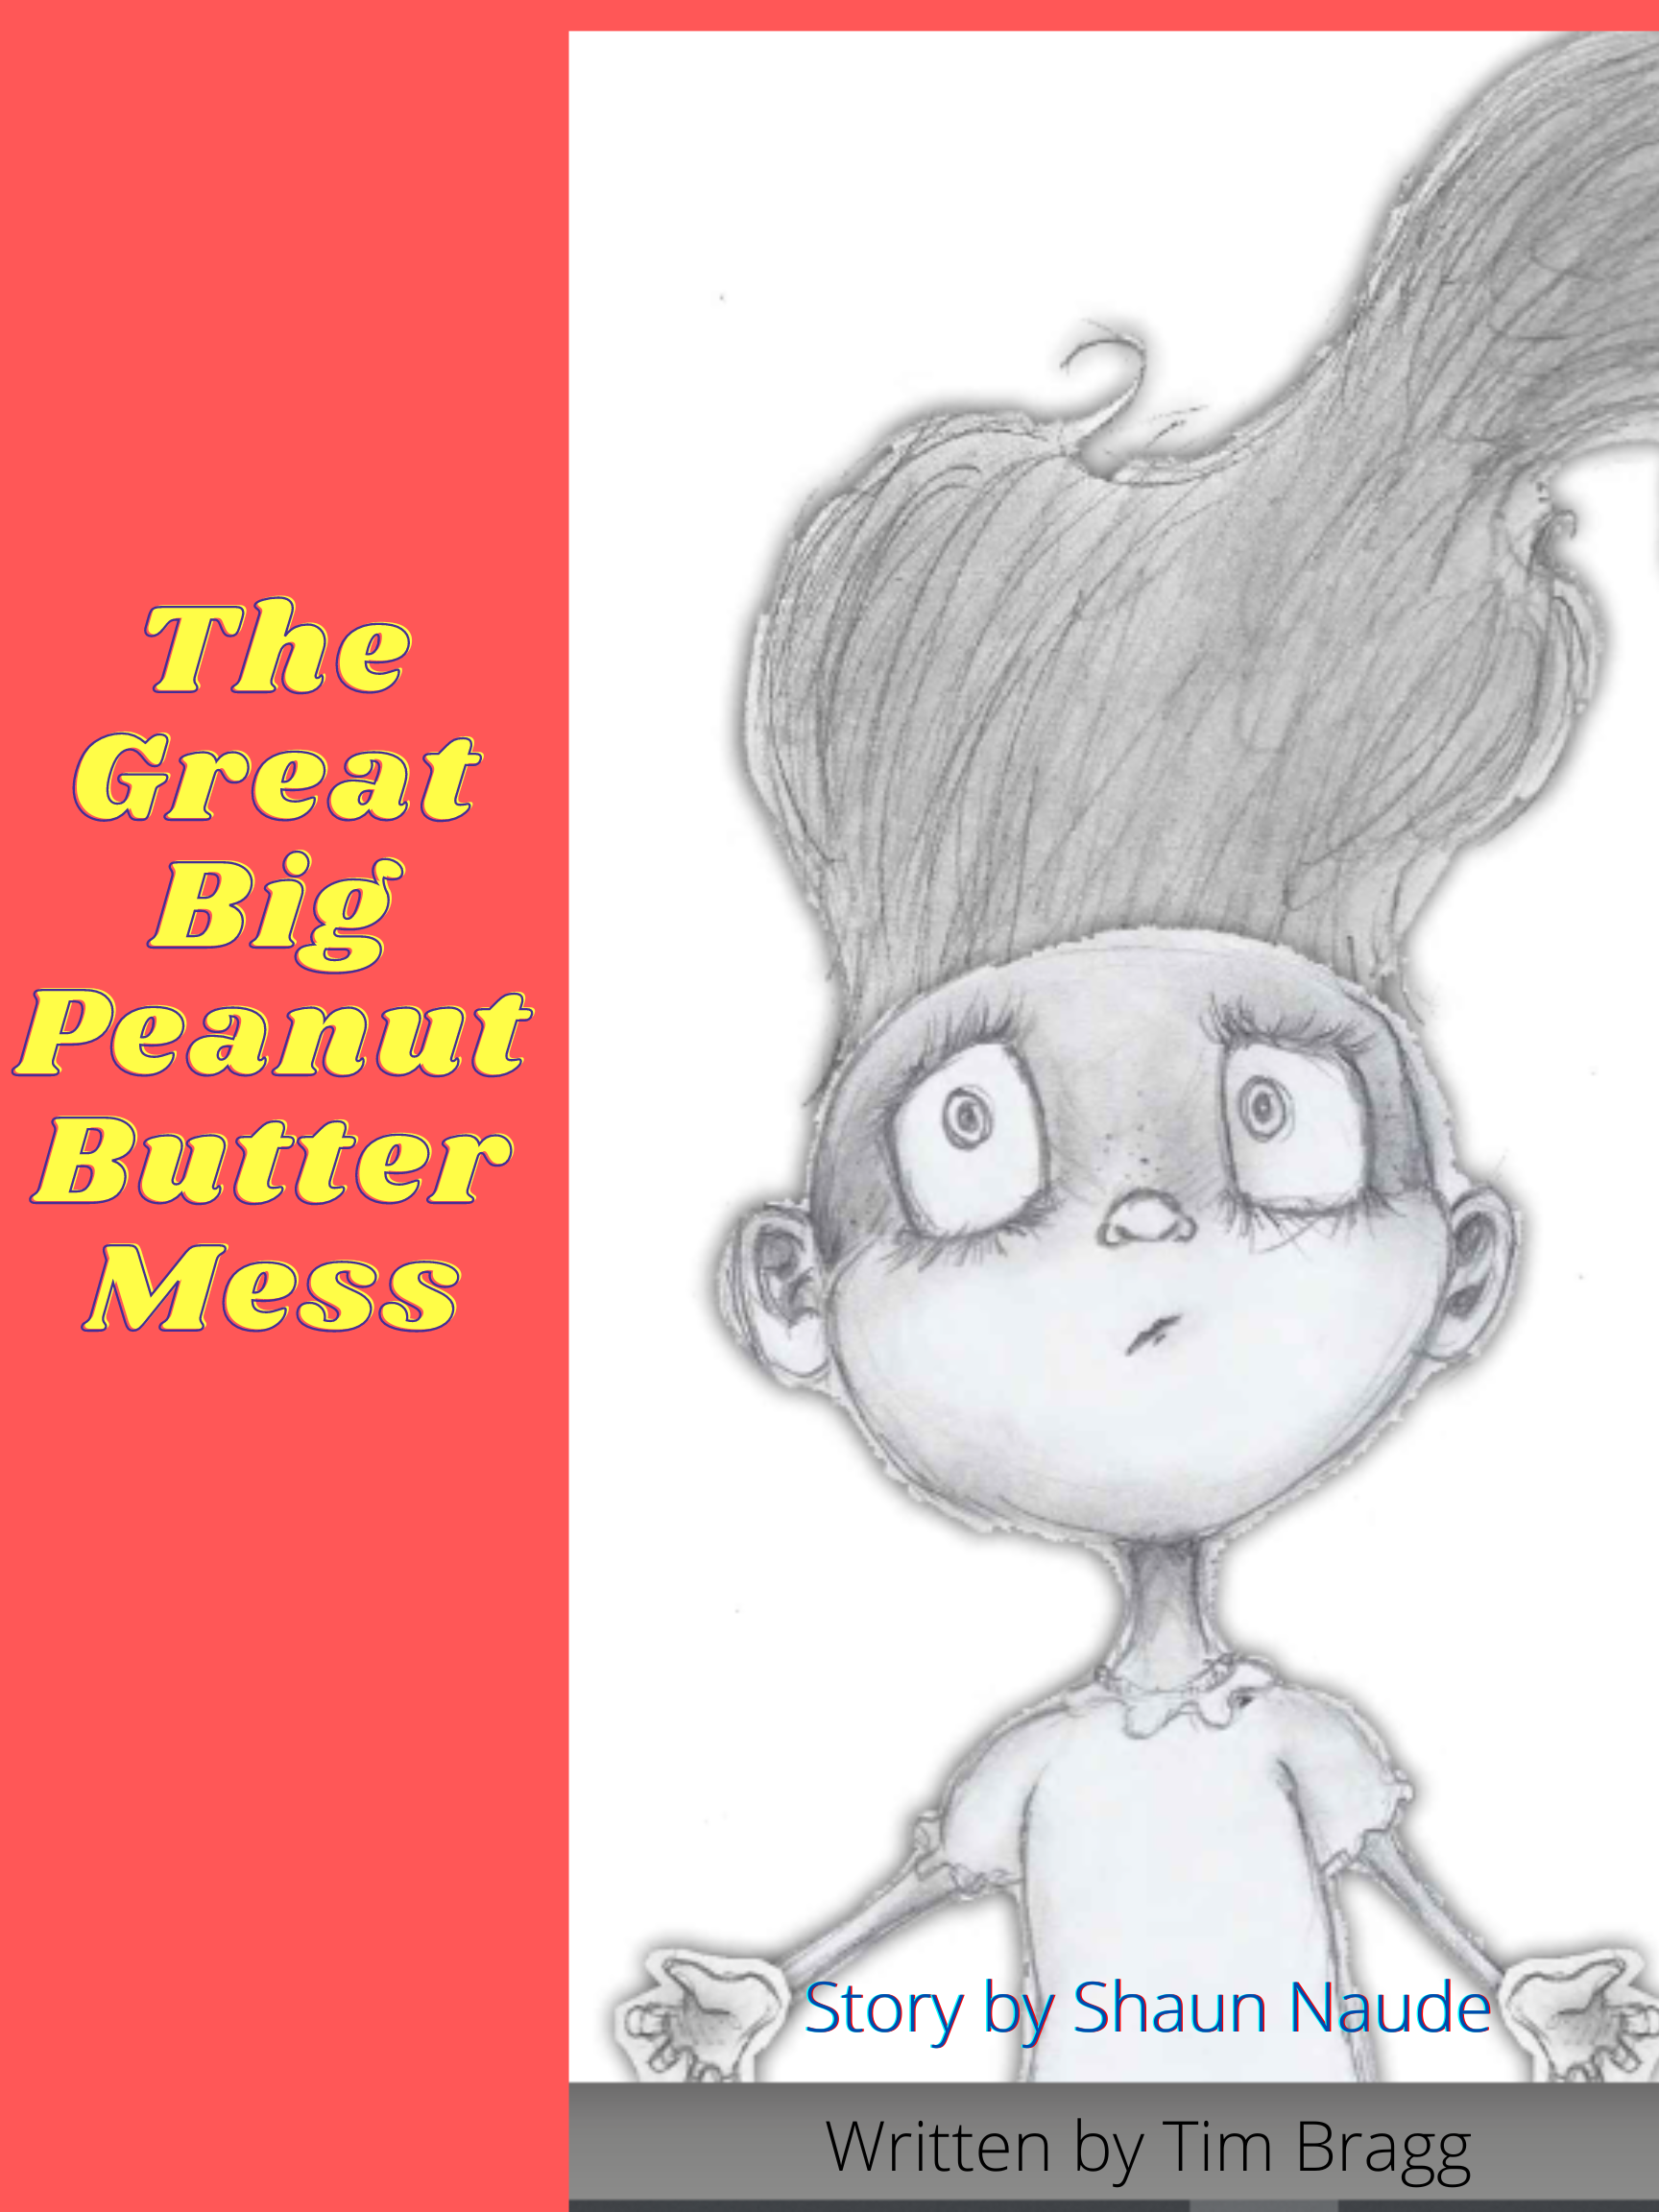 THE GREAT BIG PEANUT BUTTER MESS